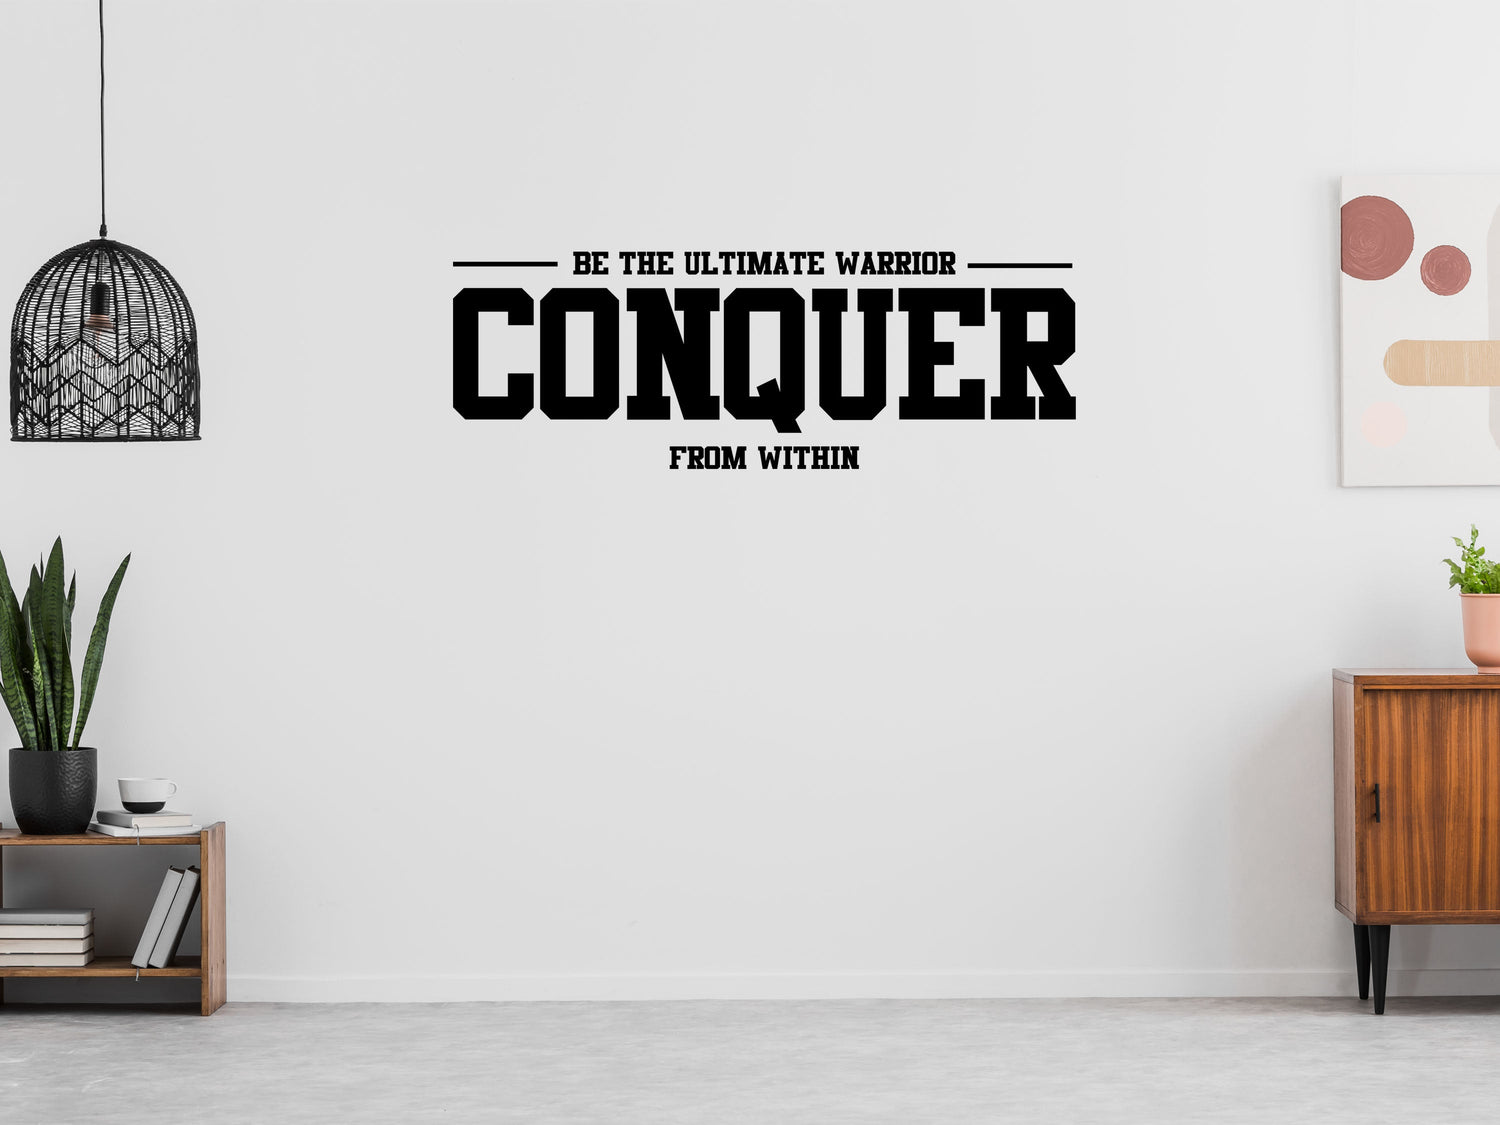 Transform Your Space with Gym & Fitness Wall Decals